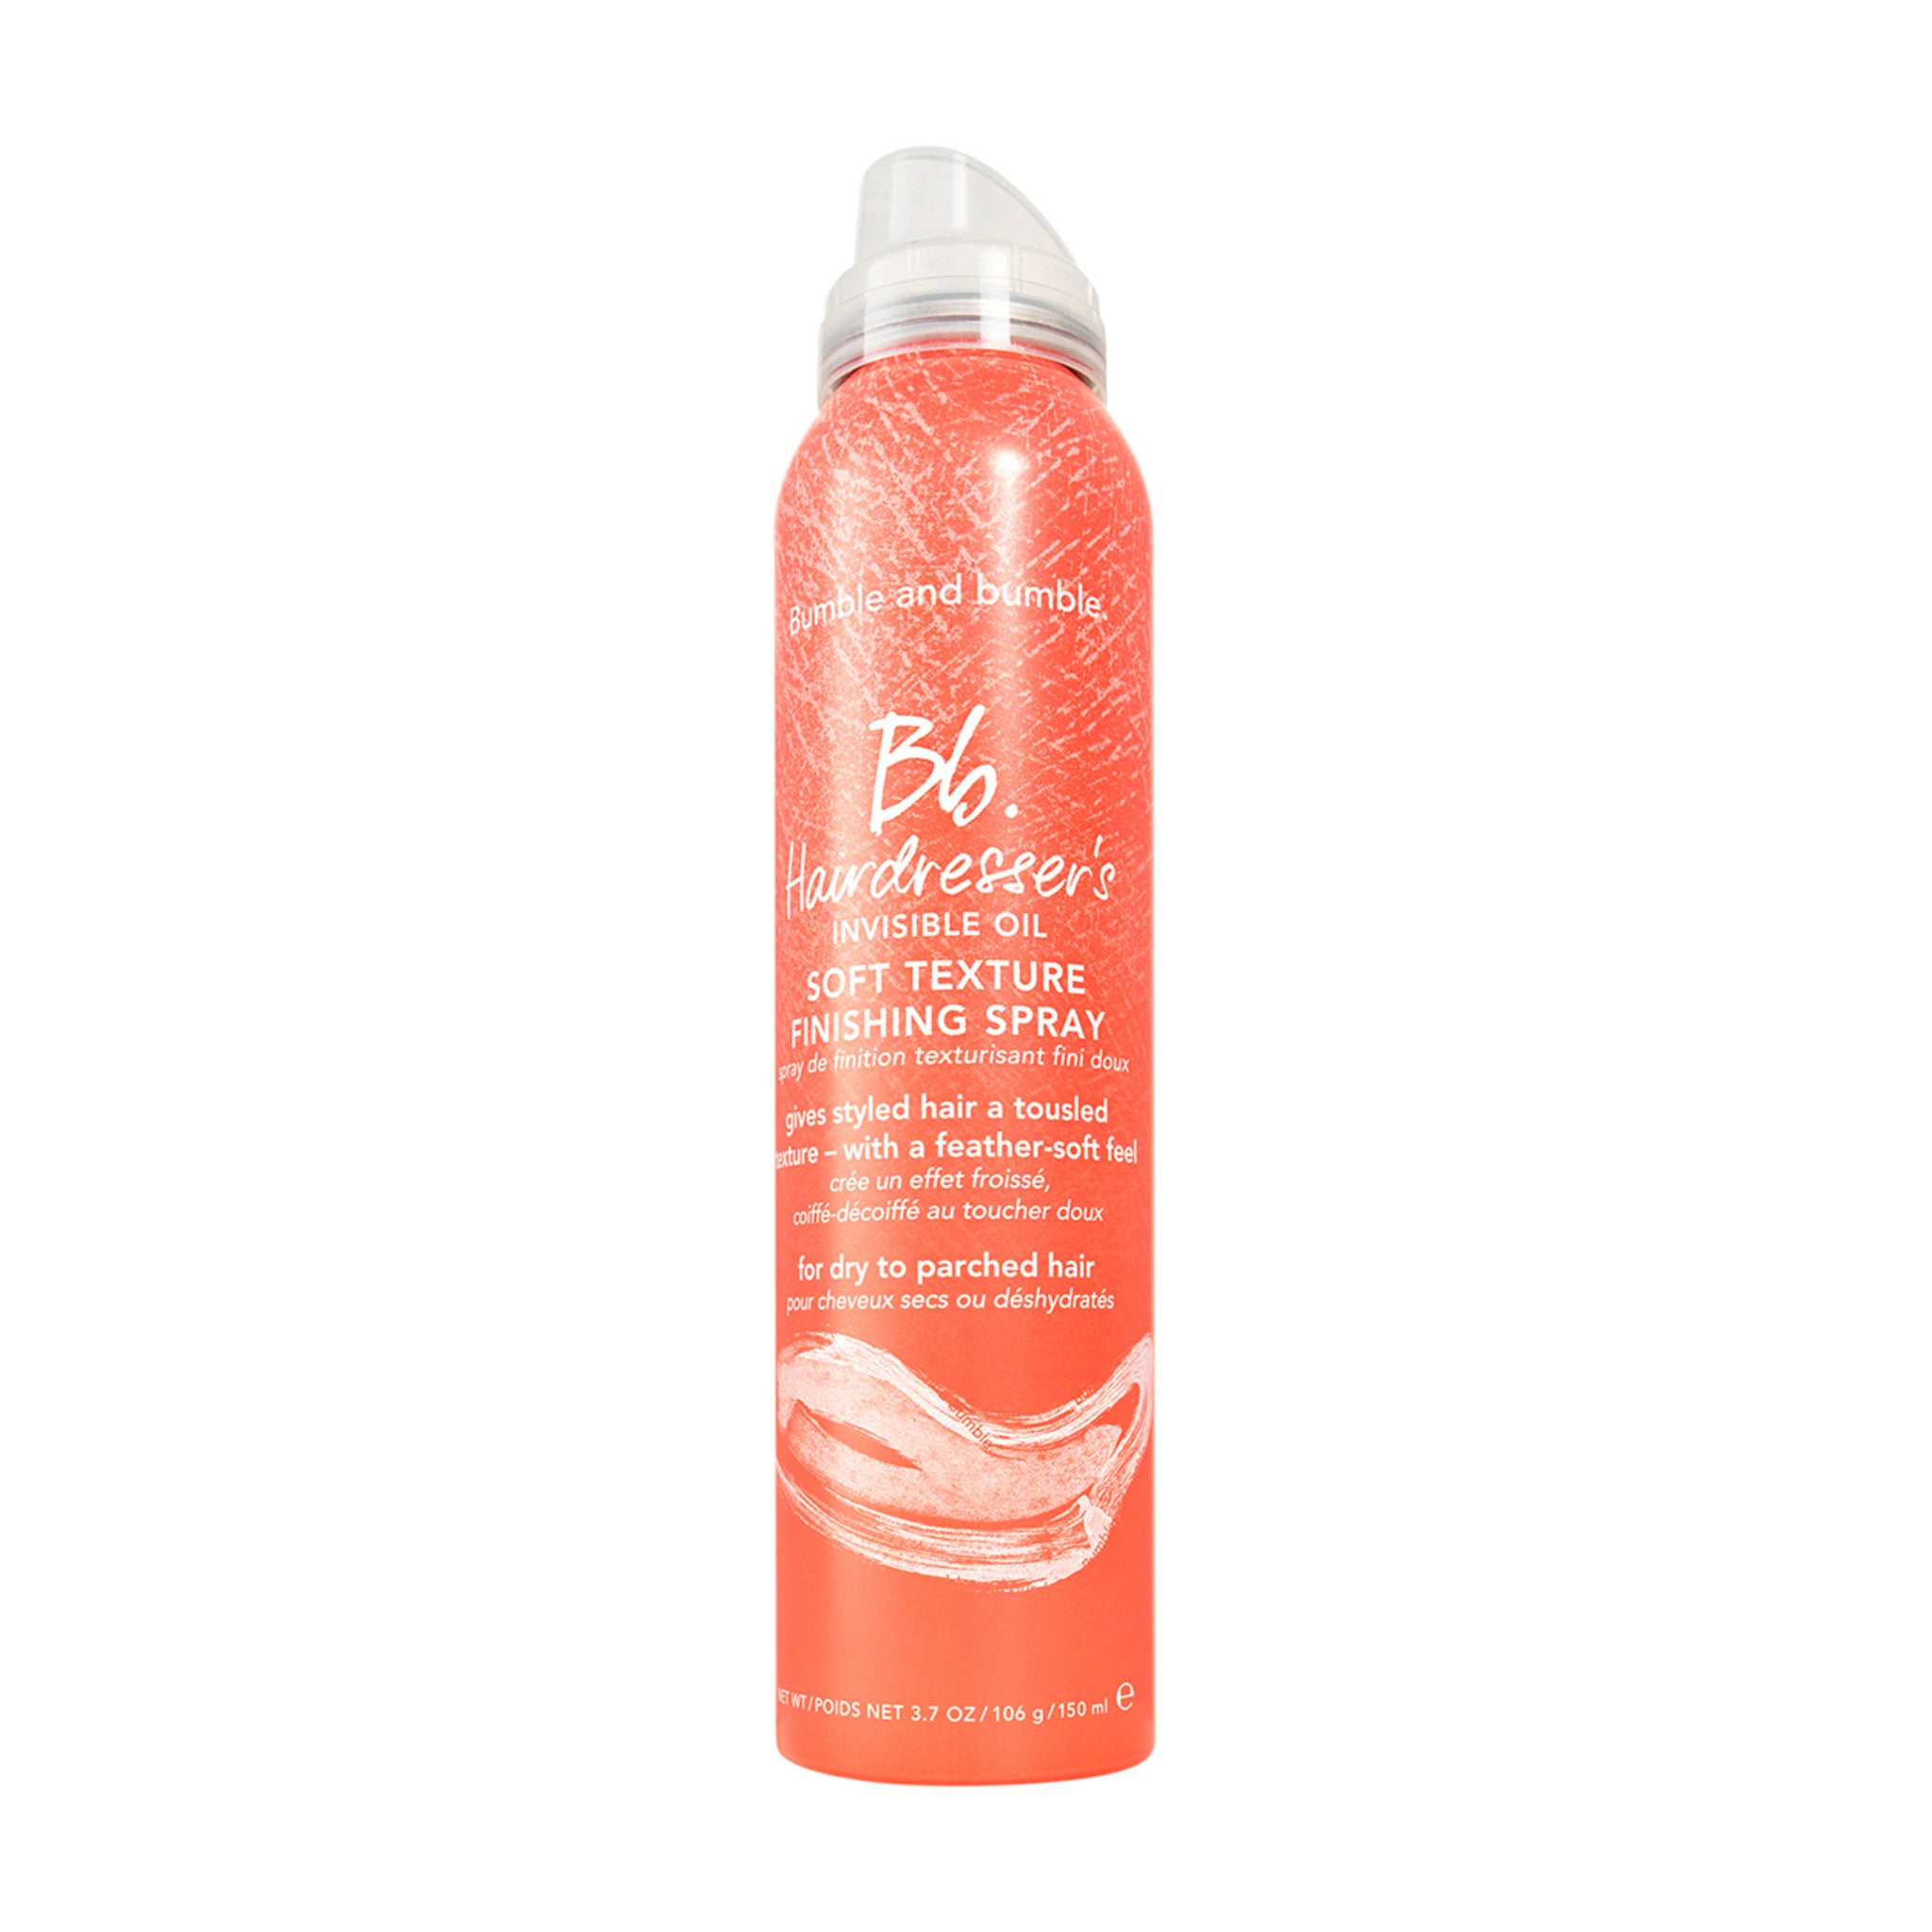 Bumble and Bumble Hairdresser's Invisible Oil Soft Texture Finishing Spray main image.